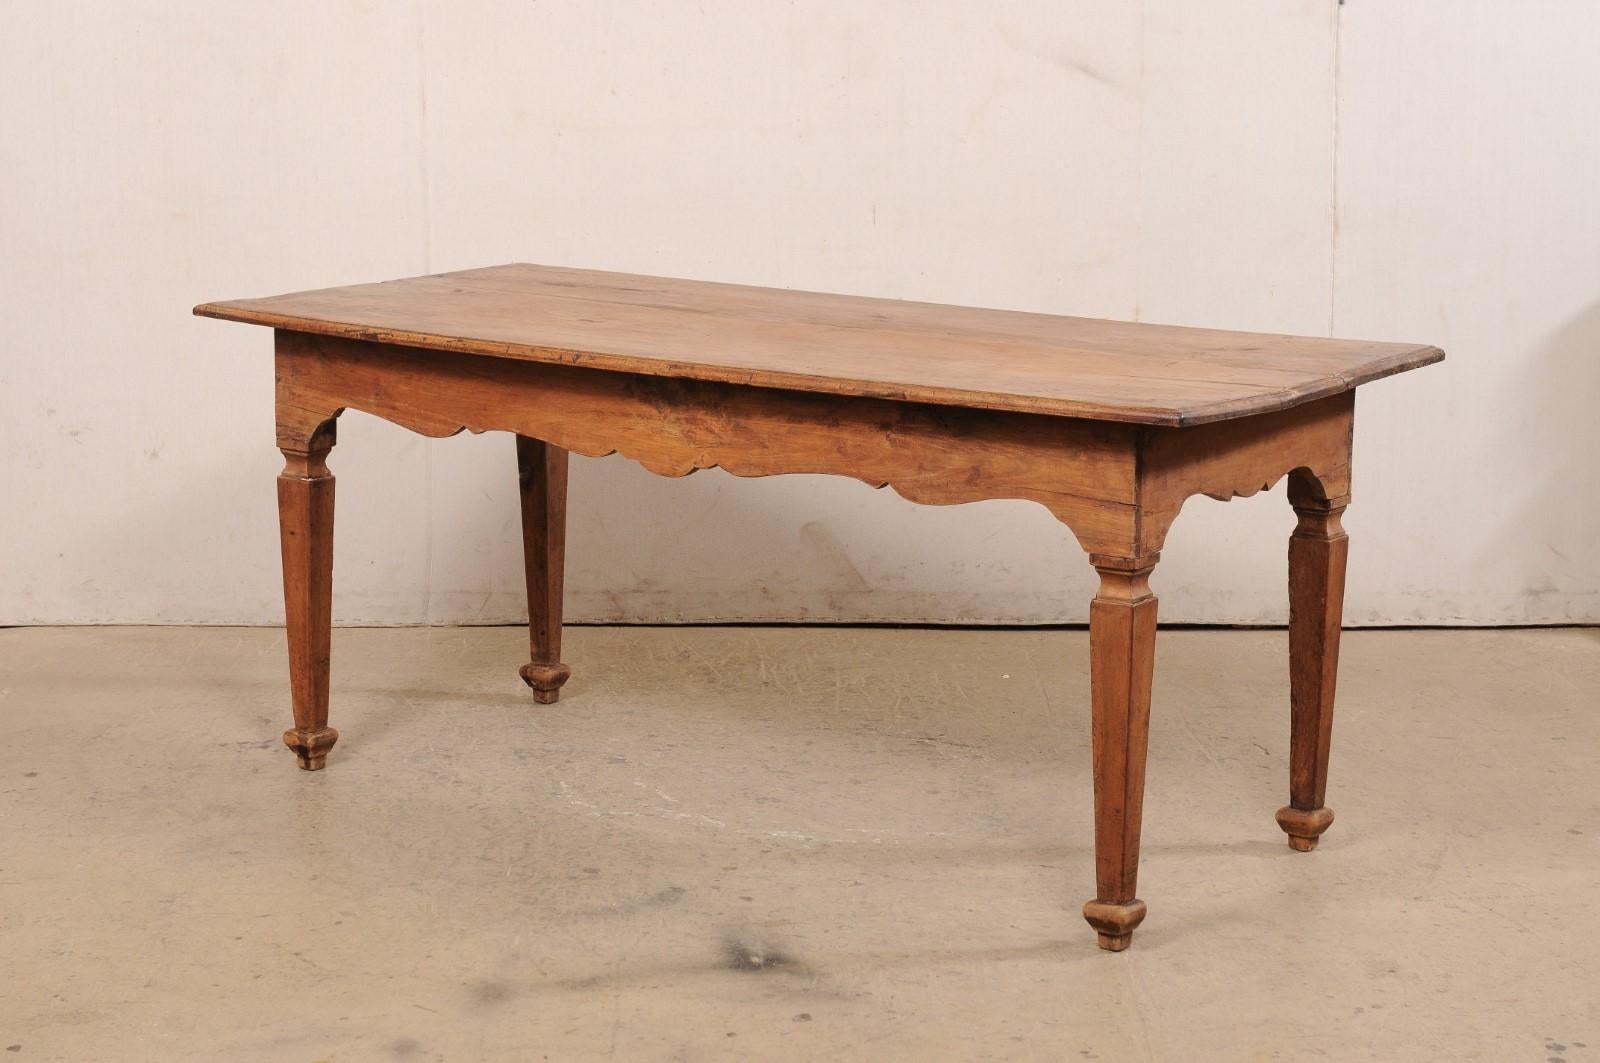 A Late 18th C. Italian Walnut Farm Table with Carved Skirt, 6 Ft Long For Sale 2